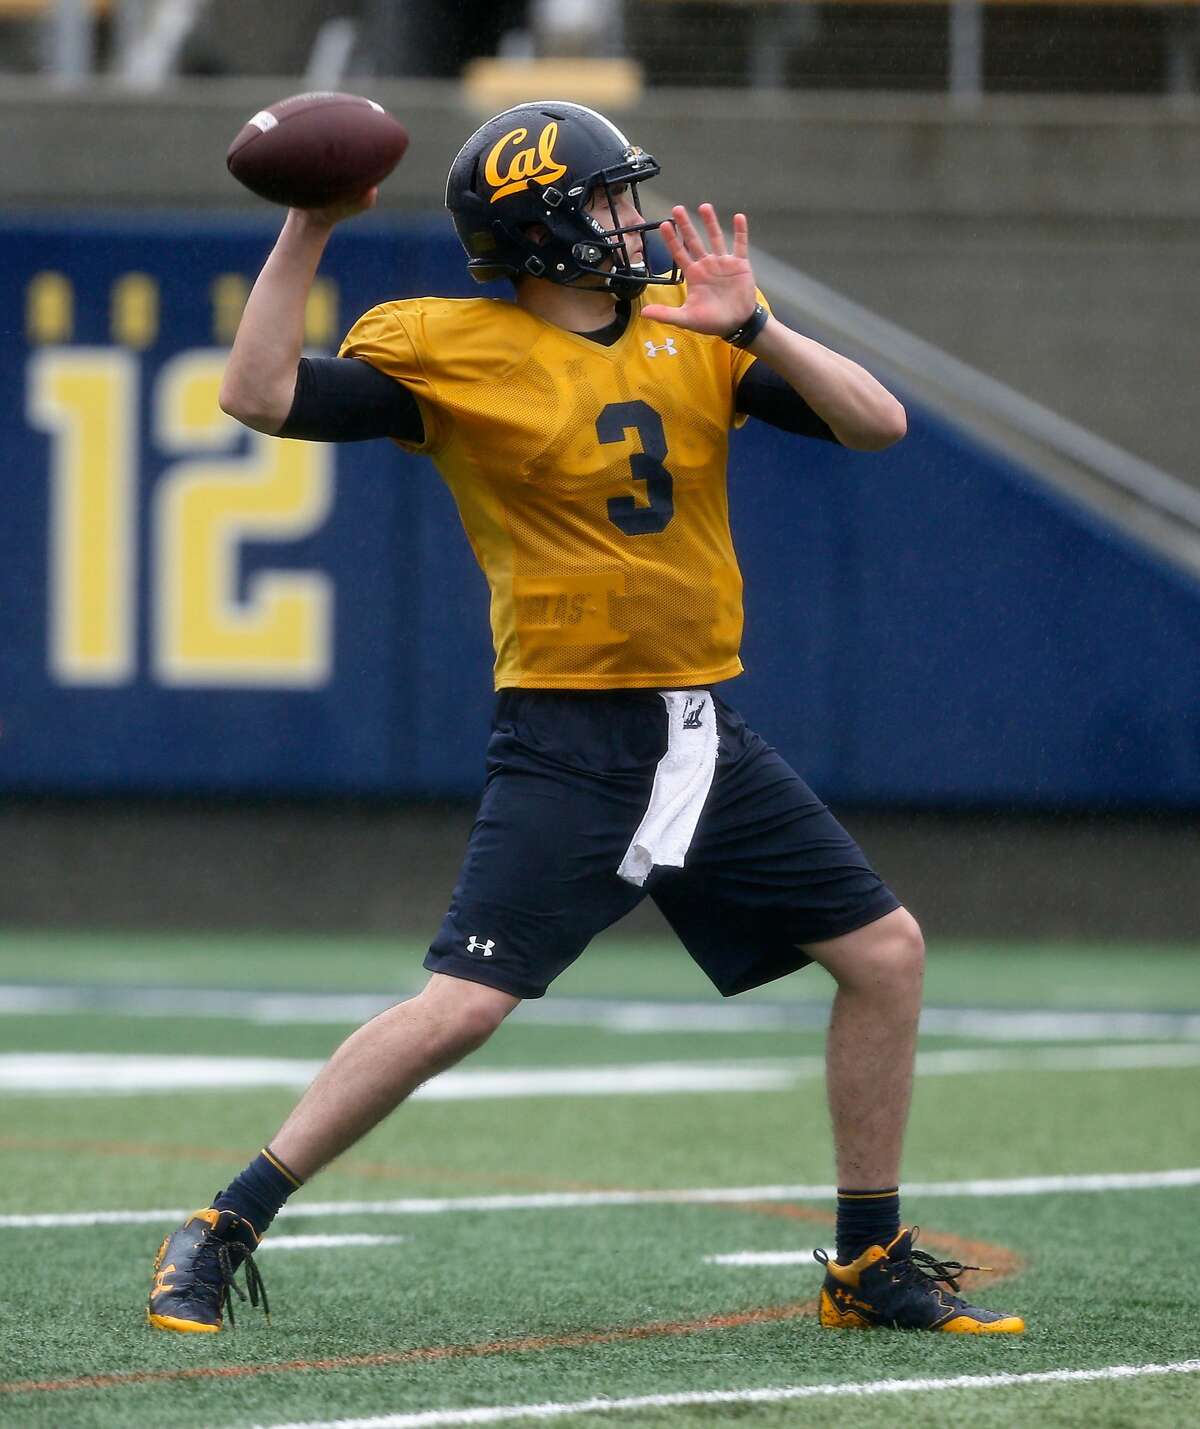 Quarterback Ross Bowers throws a pass during a Cal Bears football practice in Memorial Stadium at UC Berkeley on Friday, April 6, 2018.